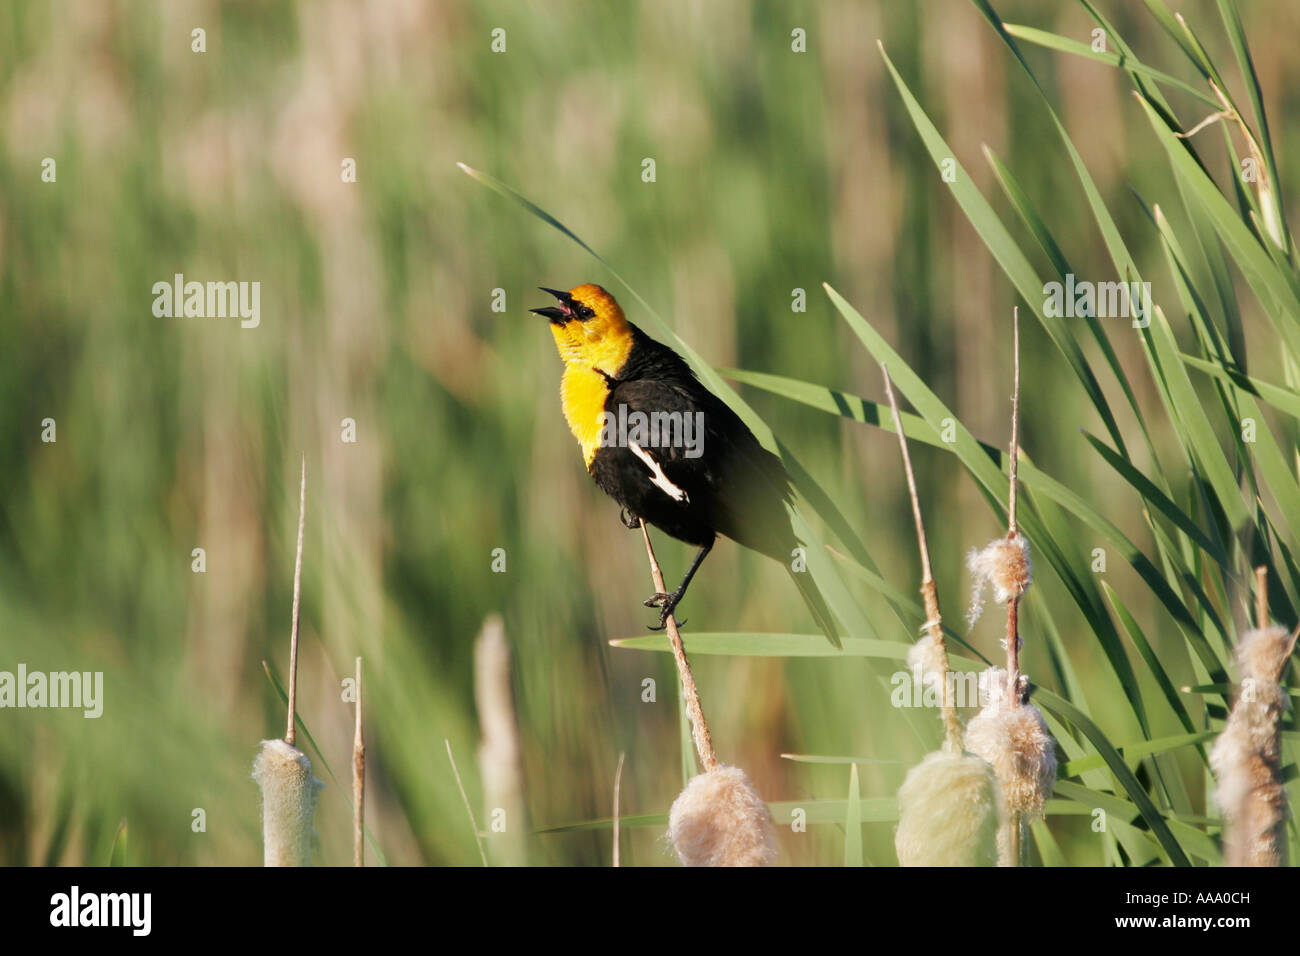 Yellow Headed blackbird perched on grass singing. Stock Photo